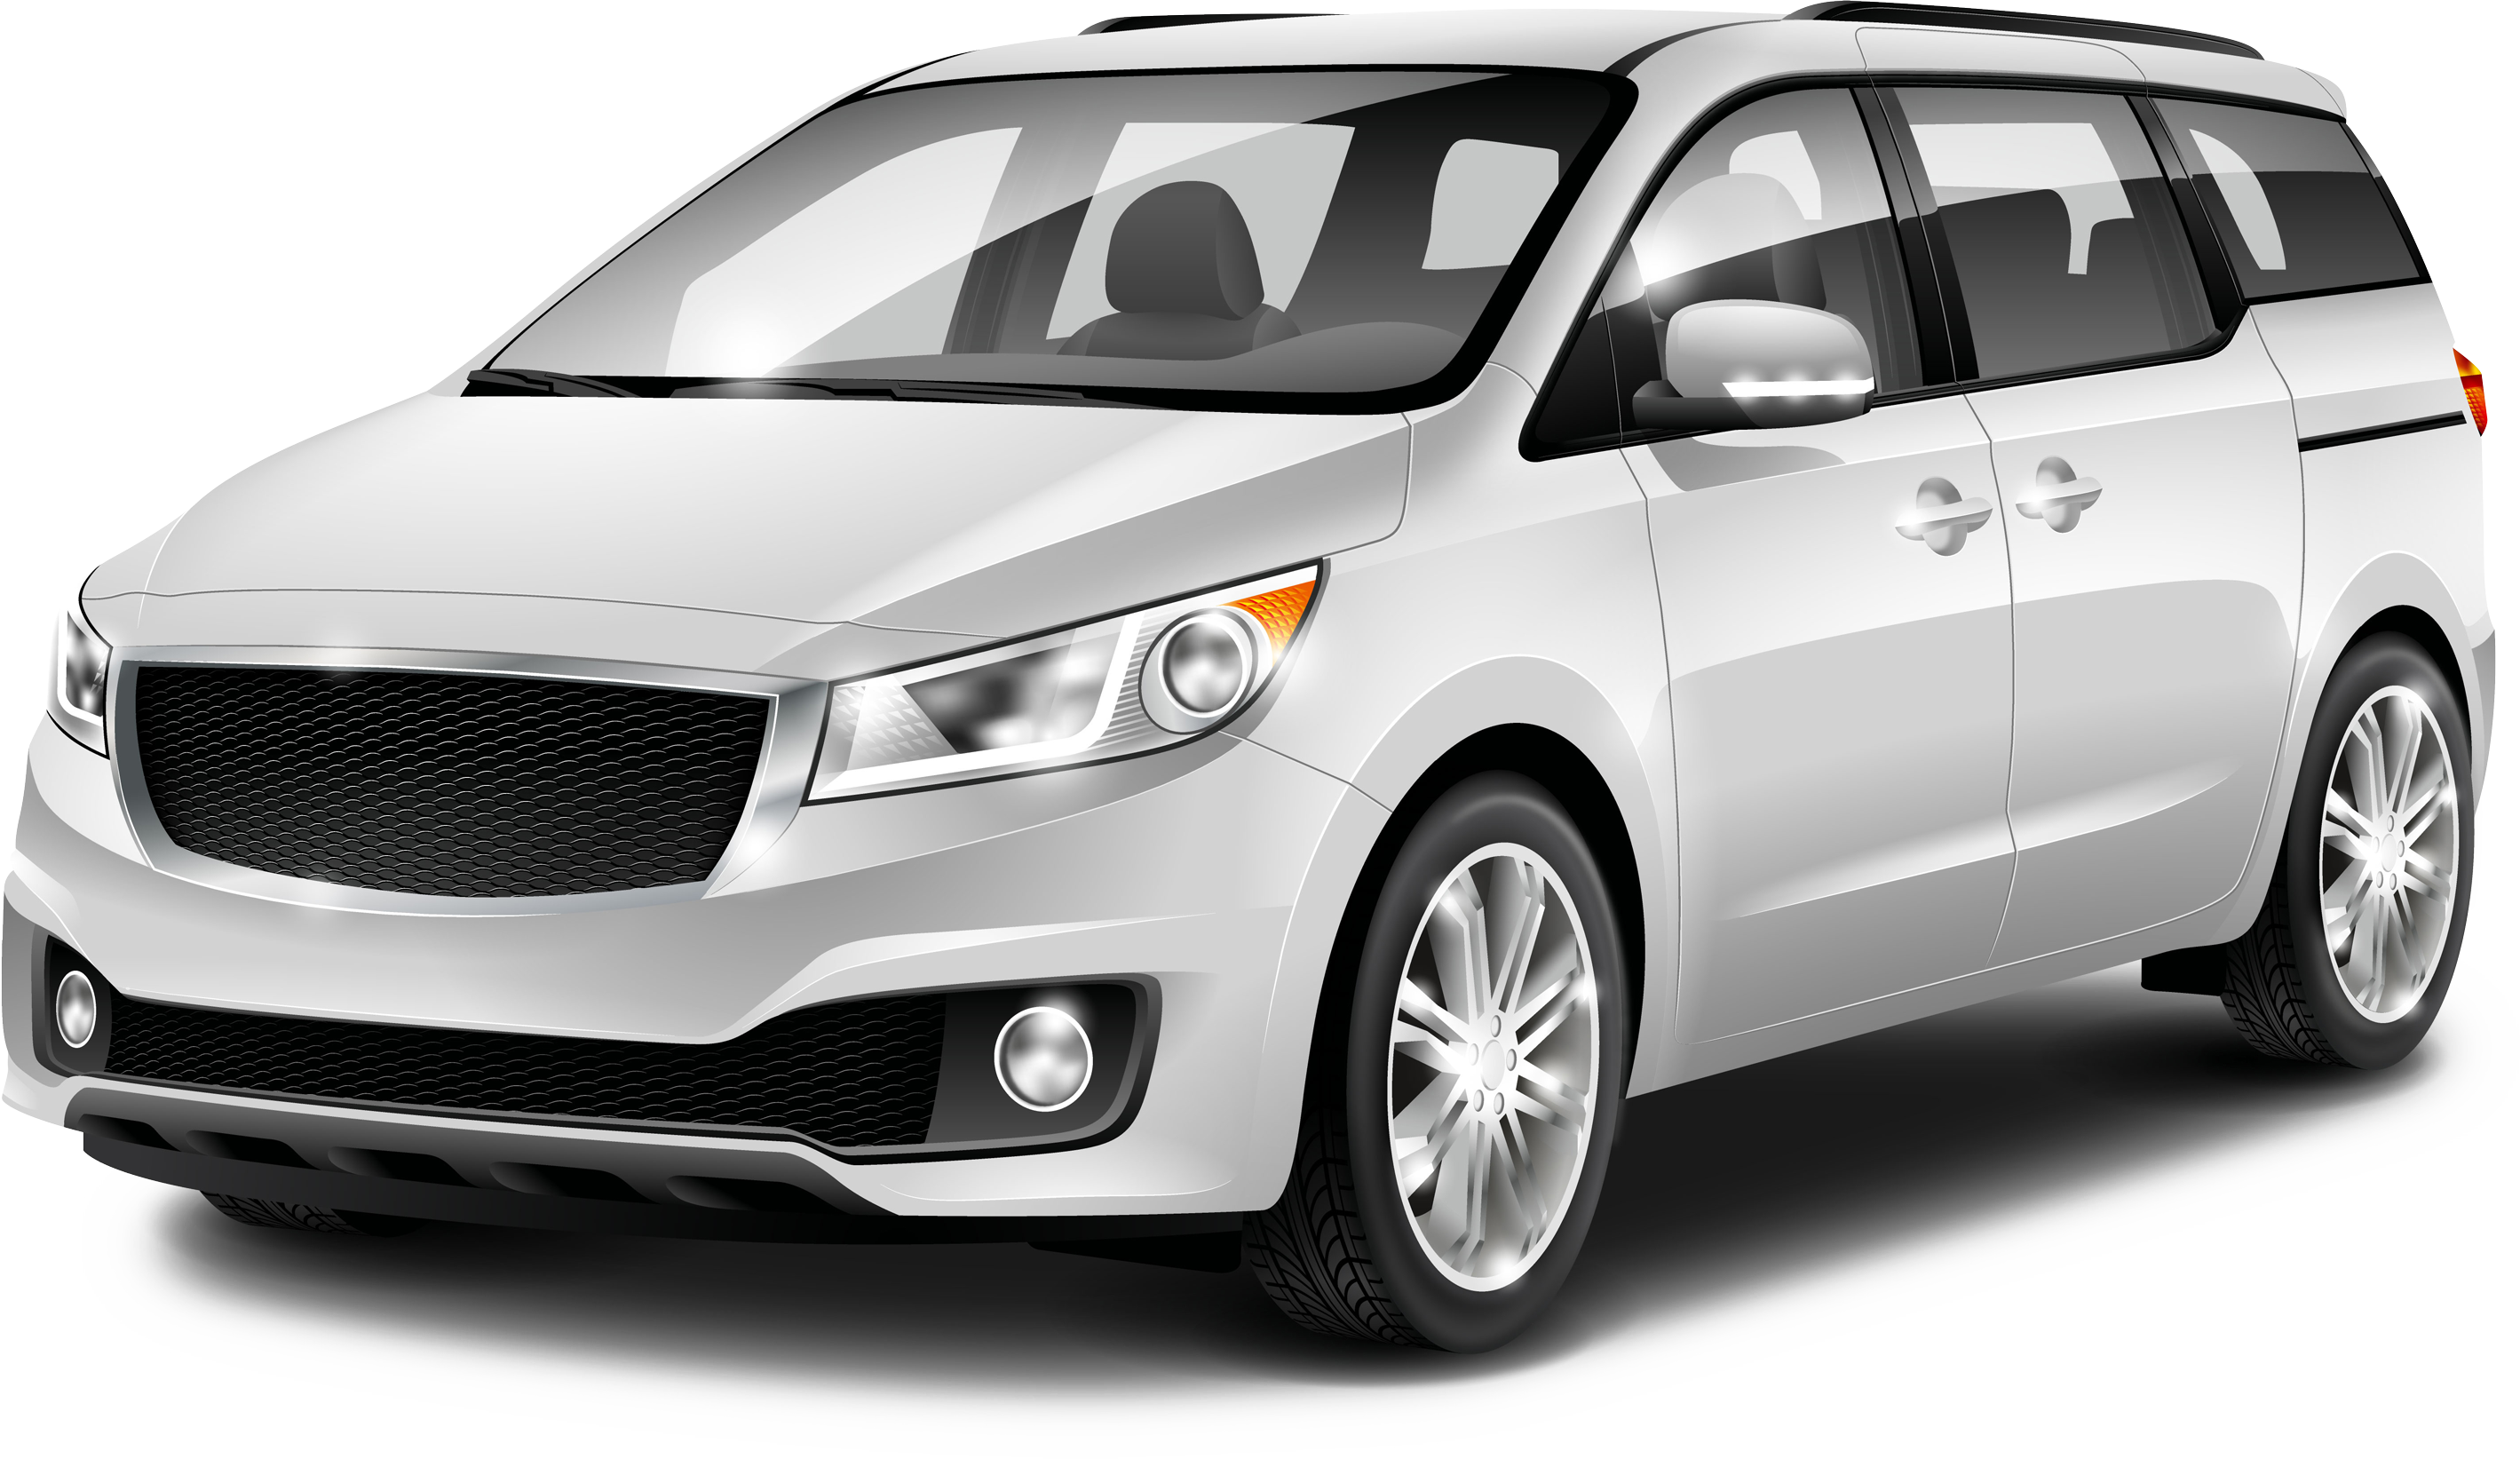 Cheap Car Rental Deals in Philippines from $22 ...